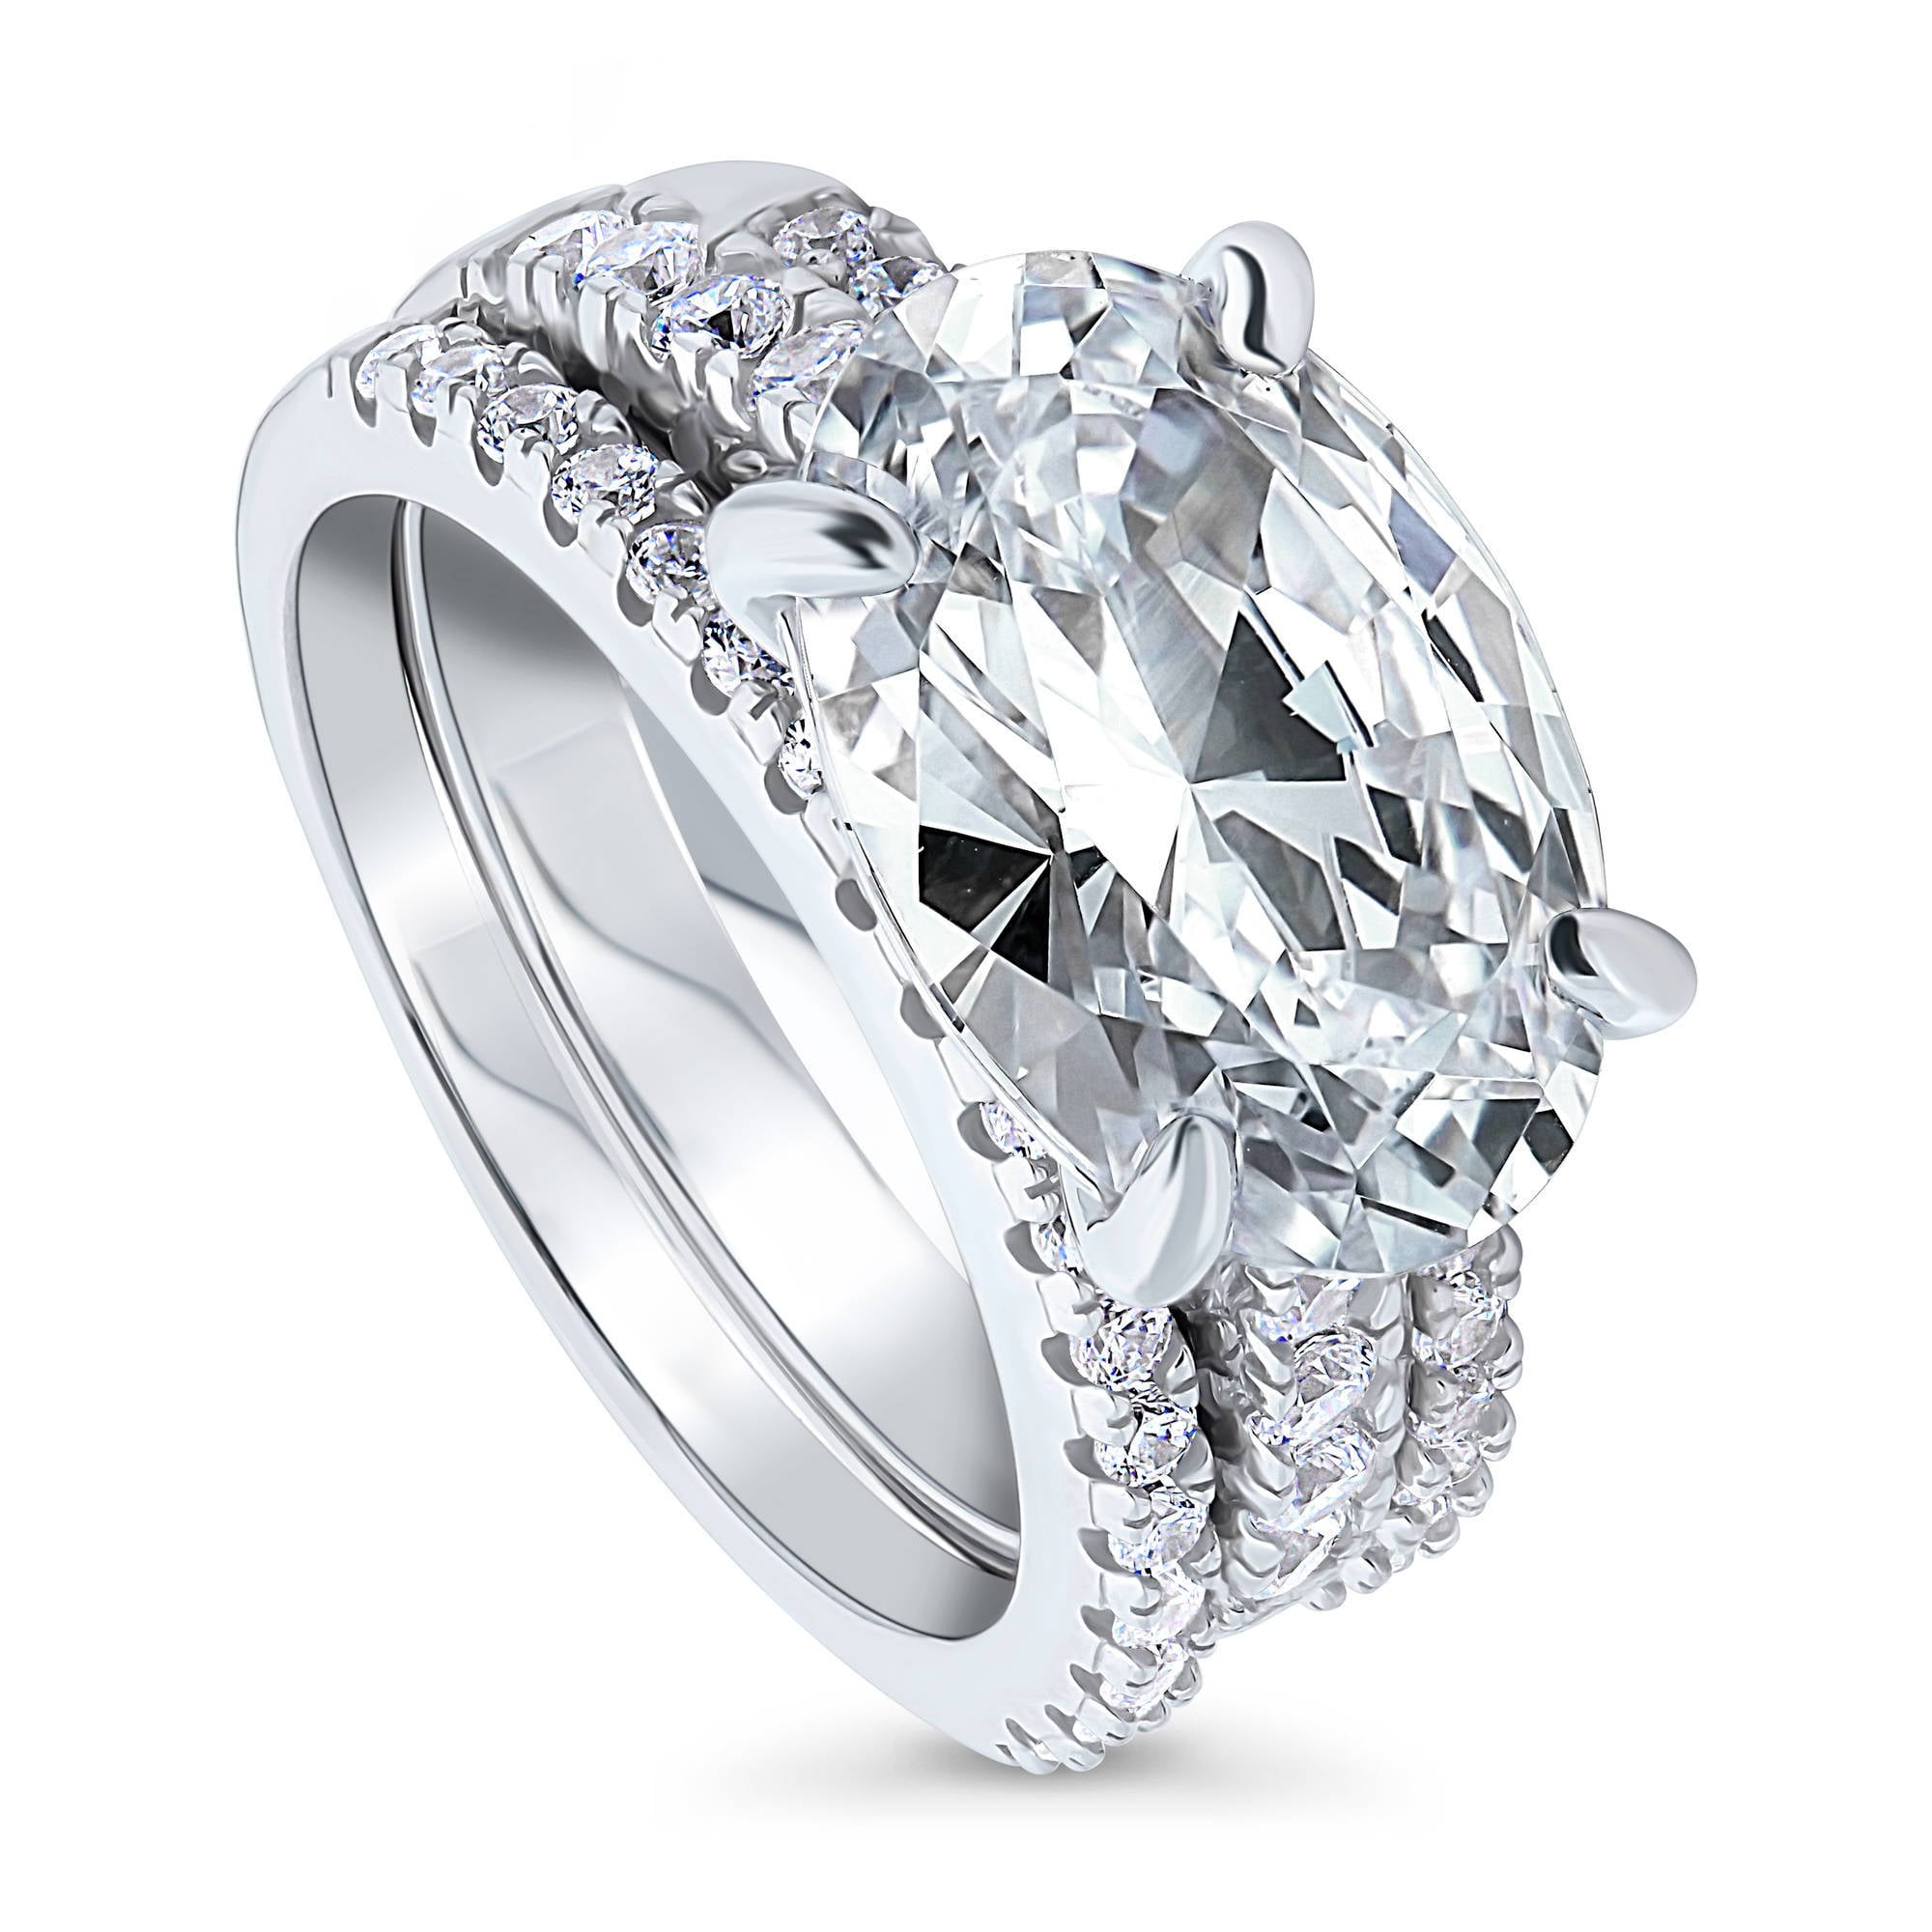 BERRICLE Sterling Silver CZ East-West Solitaire Wedding Engagement Ring Set 